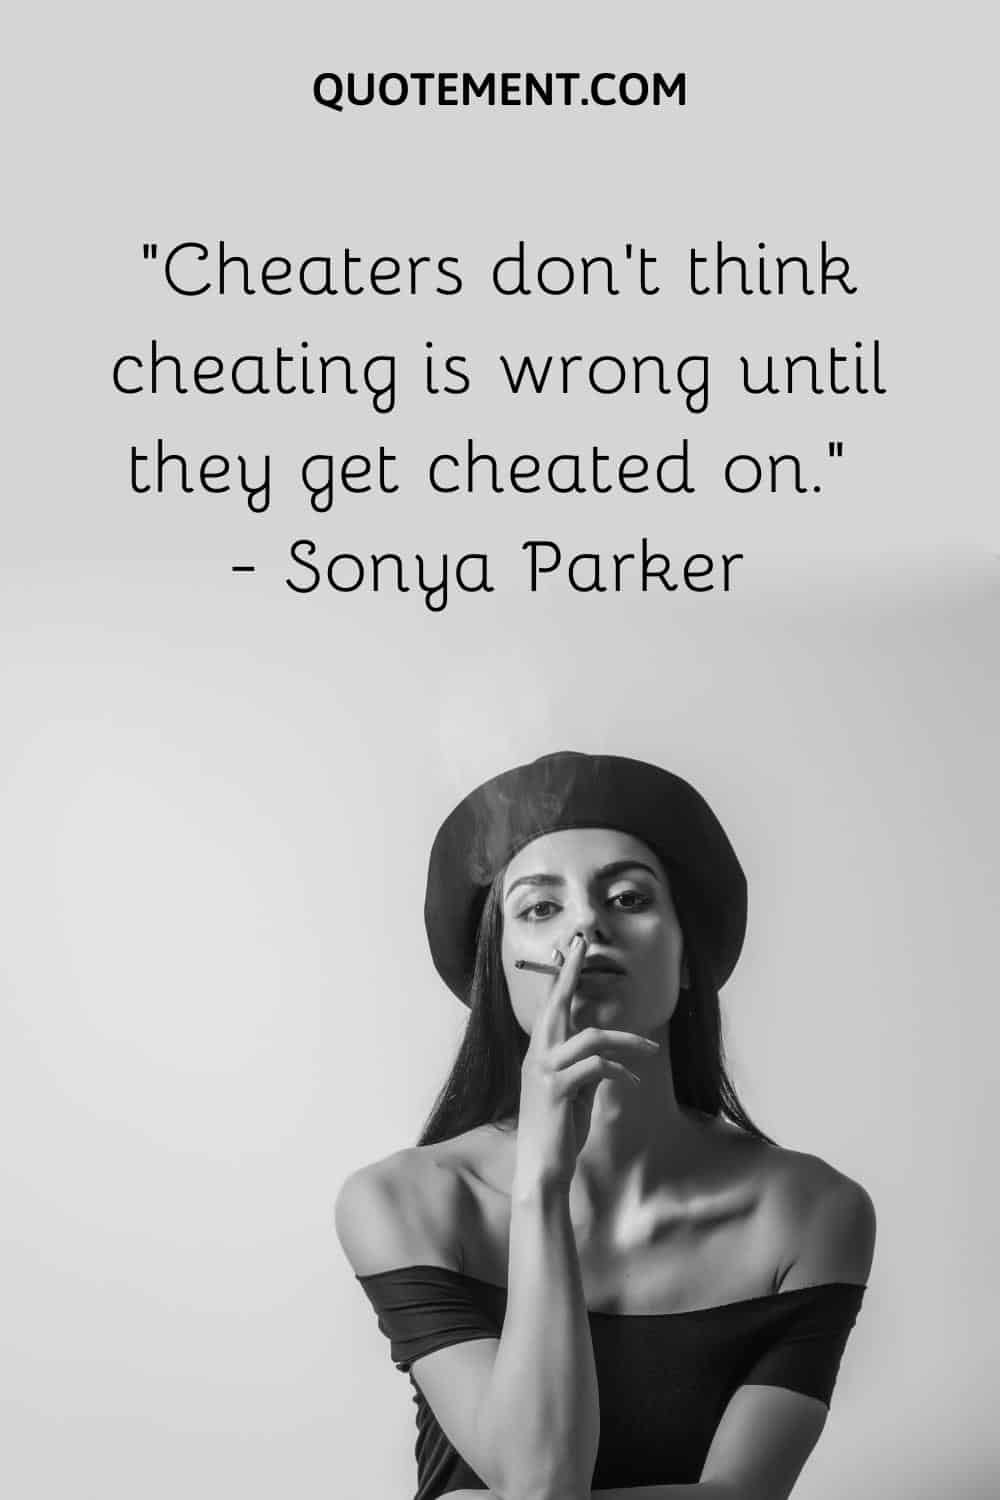 Cheaters don’t think cheating is wrong until they get cheated on